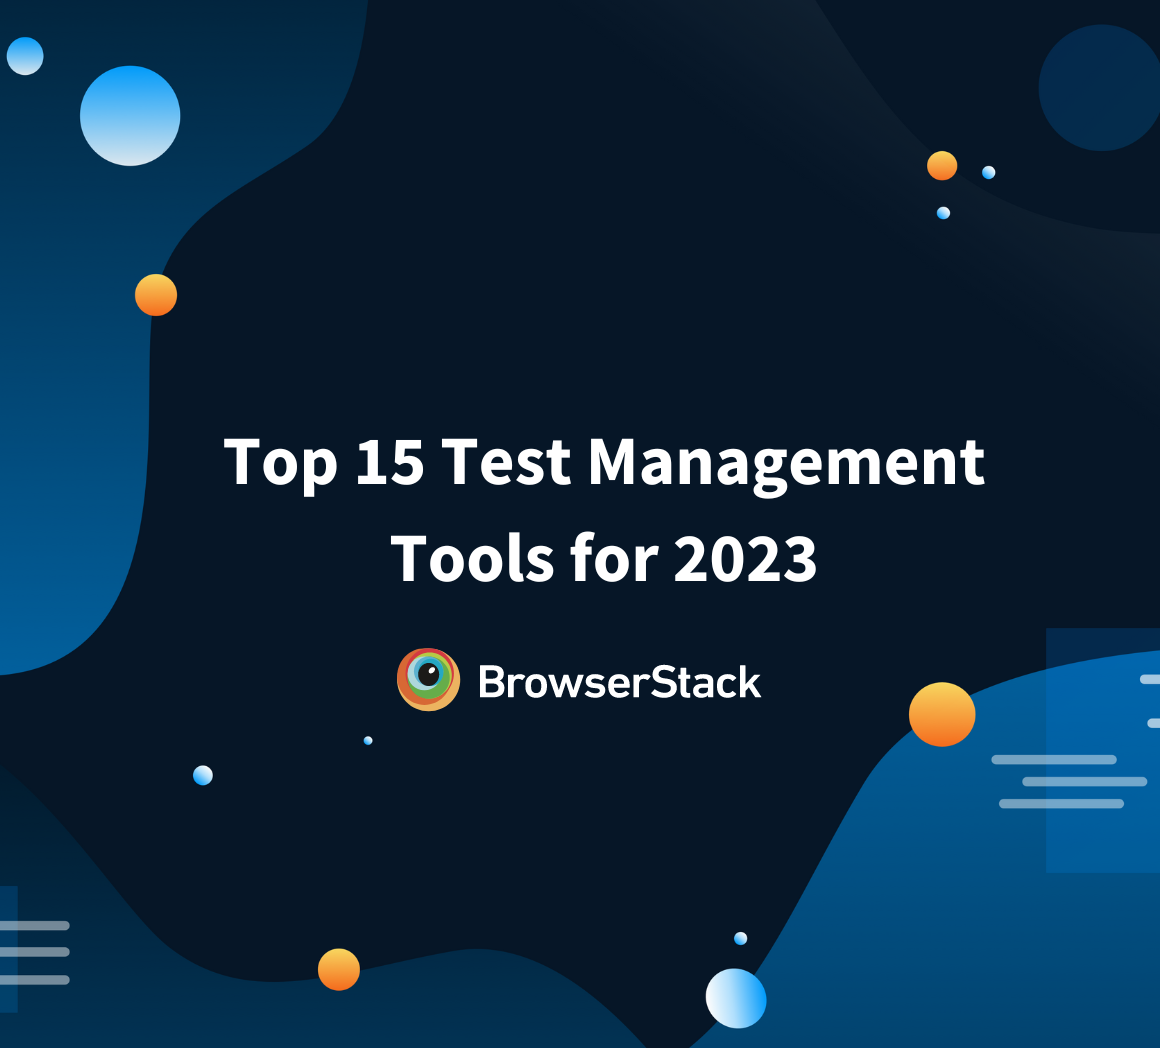 Top 15 Test Management Tools for 2023